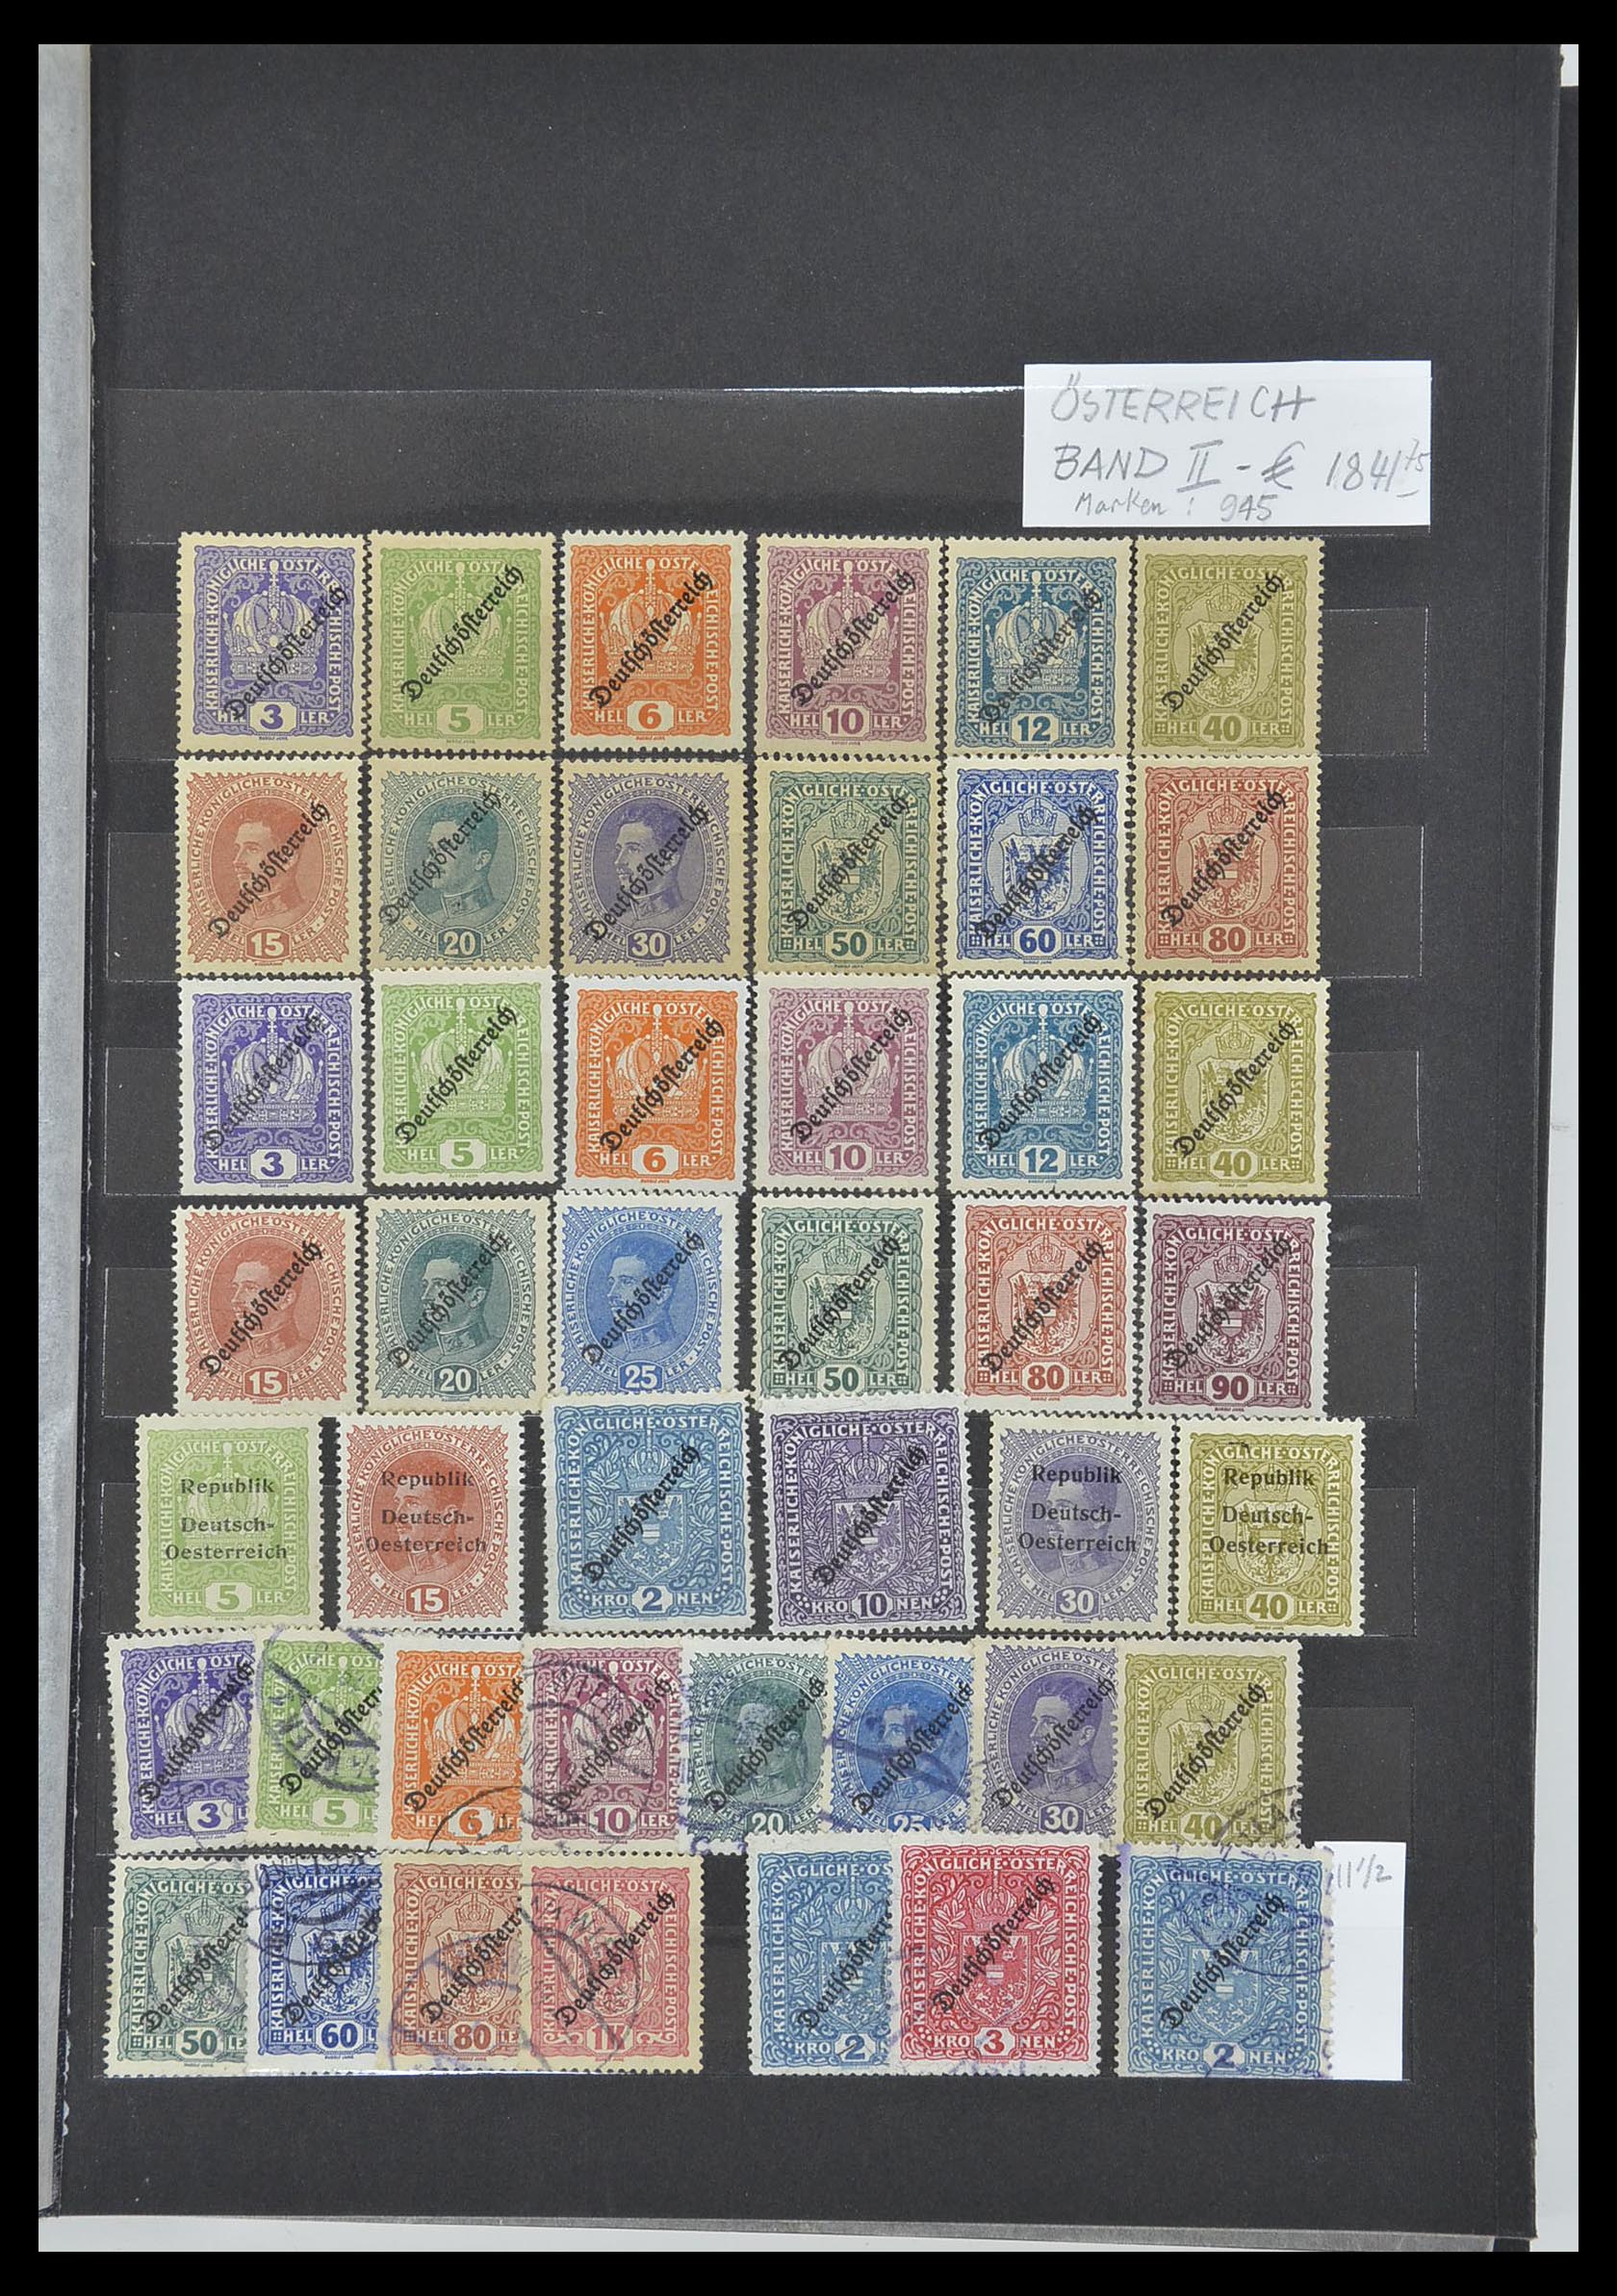 33838 017 - Stamp collection 33838 Austria 1850-1971.